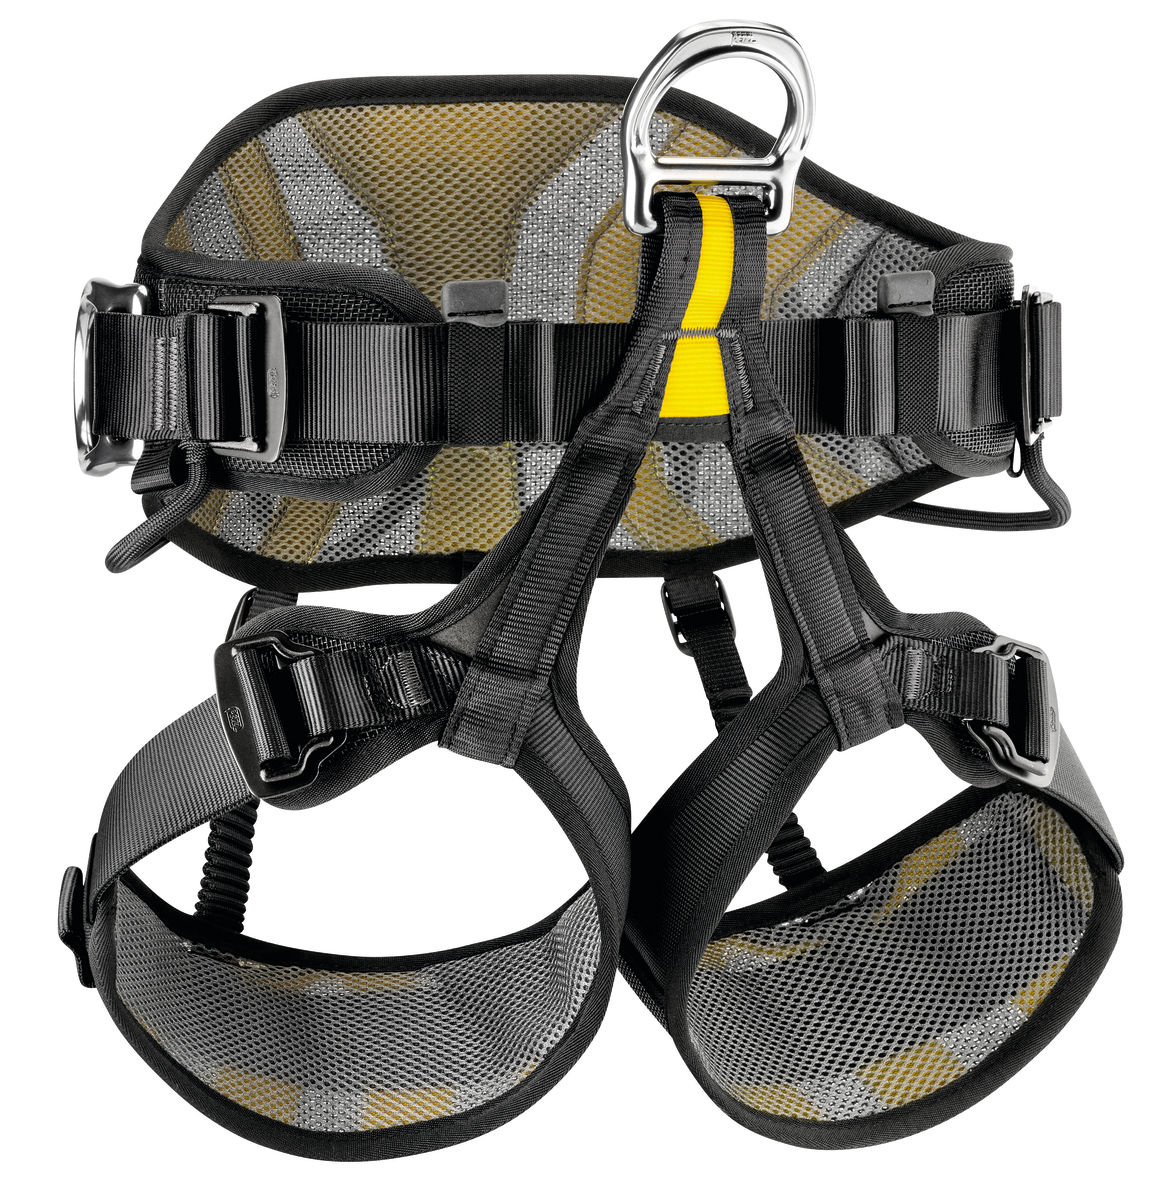 Work Positioning/Suspension Harnesses